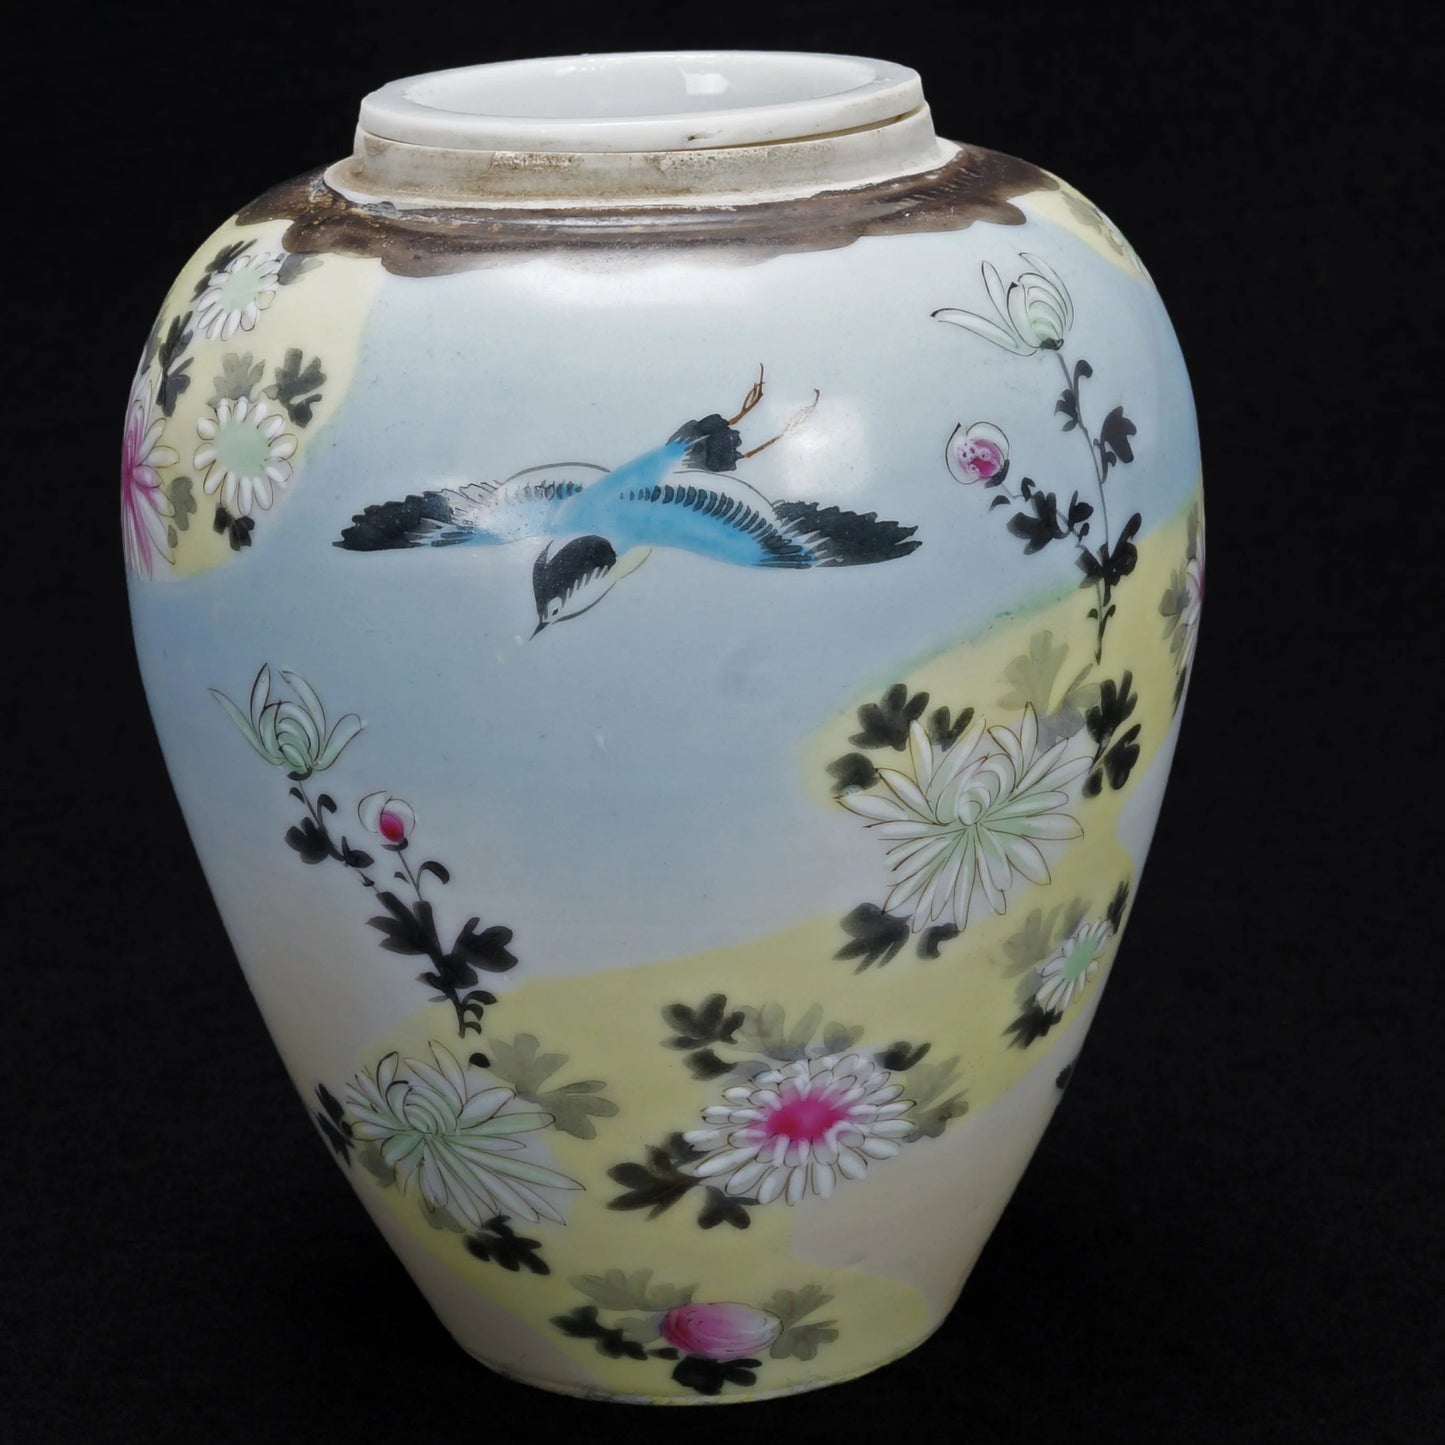 Japanese Mid-20th C Porcelain Polychrome Tea Caddy/Canister - Bear and Raven Antiques